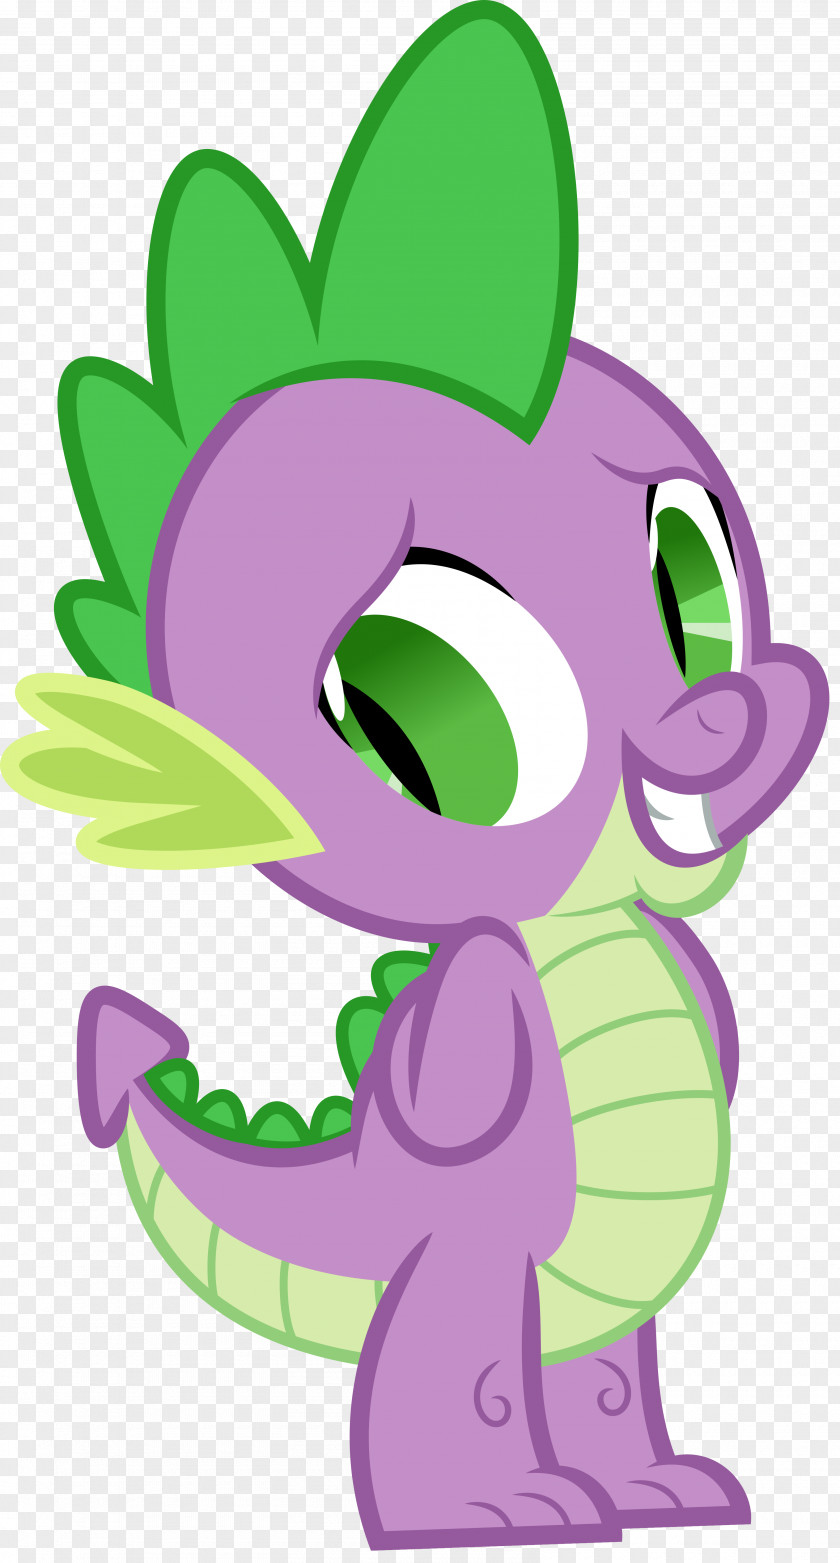 Horse Spike Rarity Pony Twilight Sparkle PNG